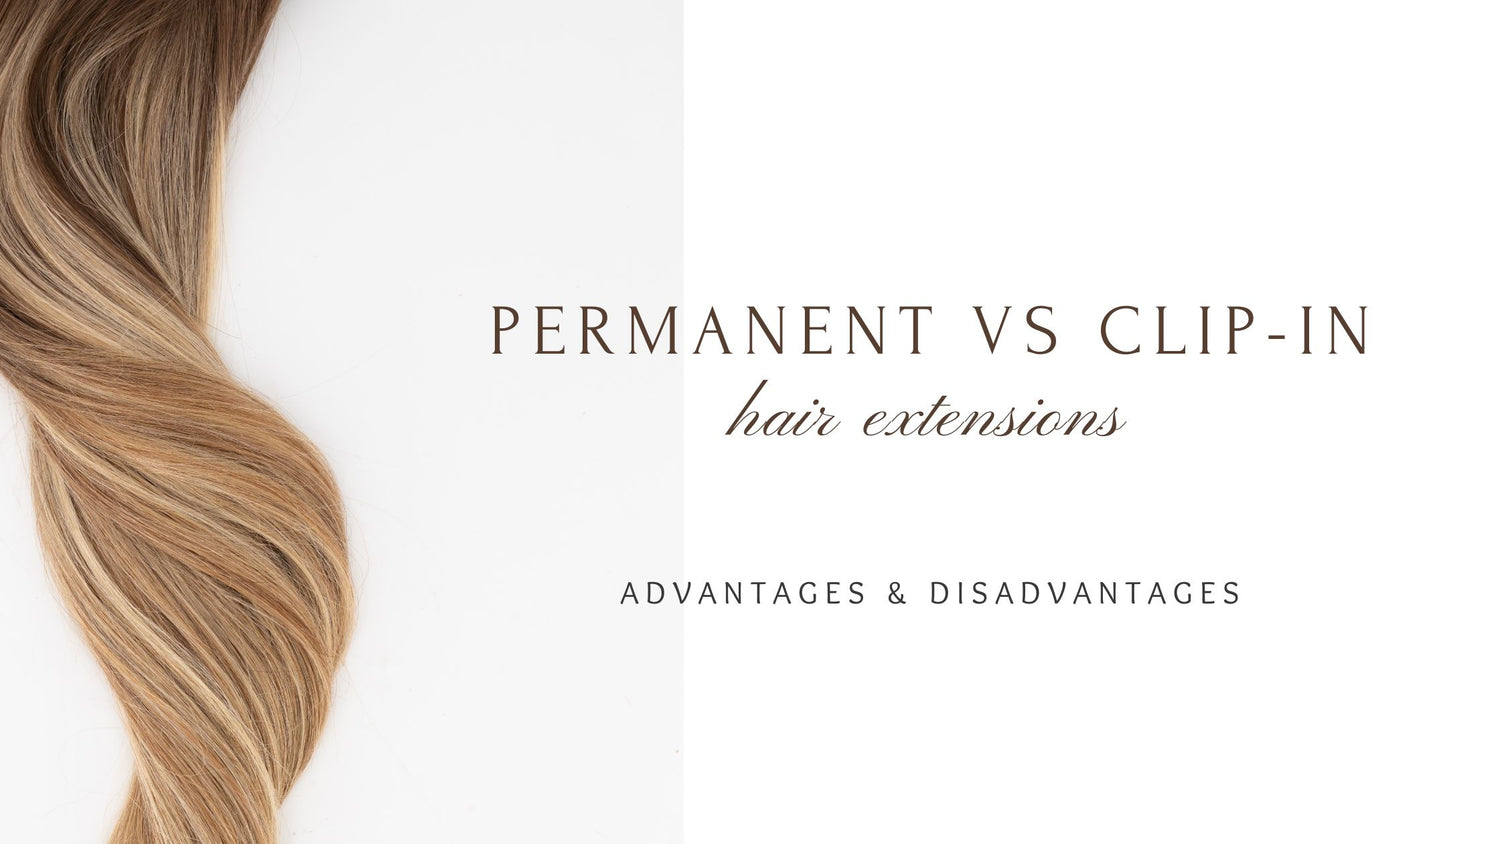 Advantages and Disadvantages of Permanent VS Clip-in Hair Extensions